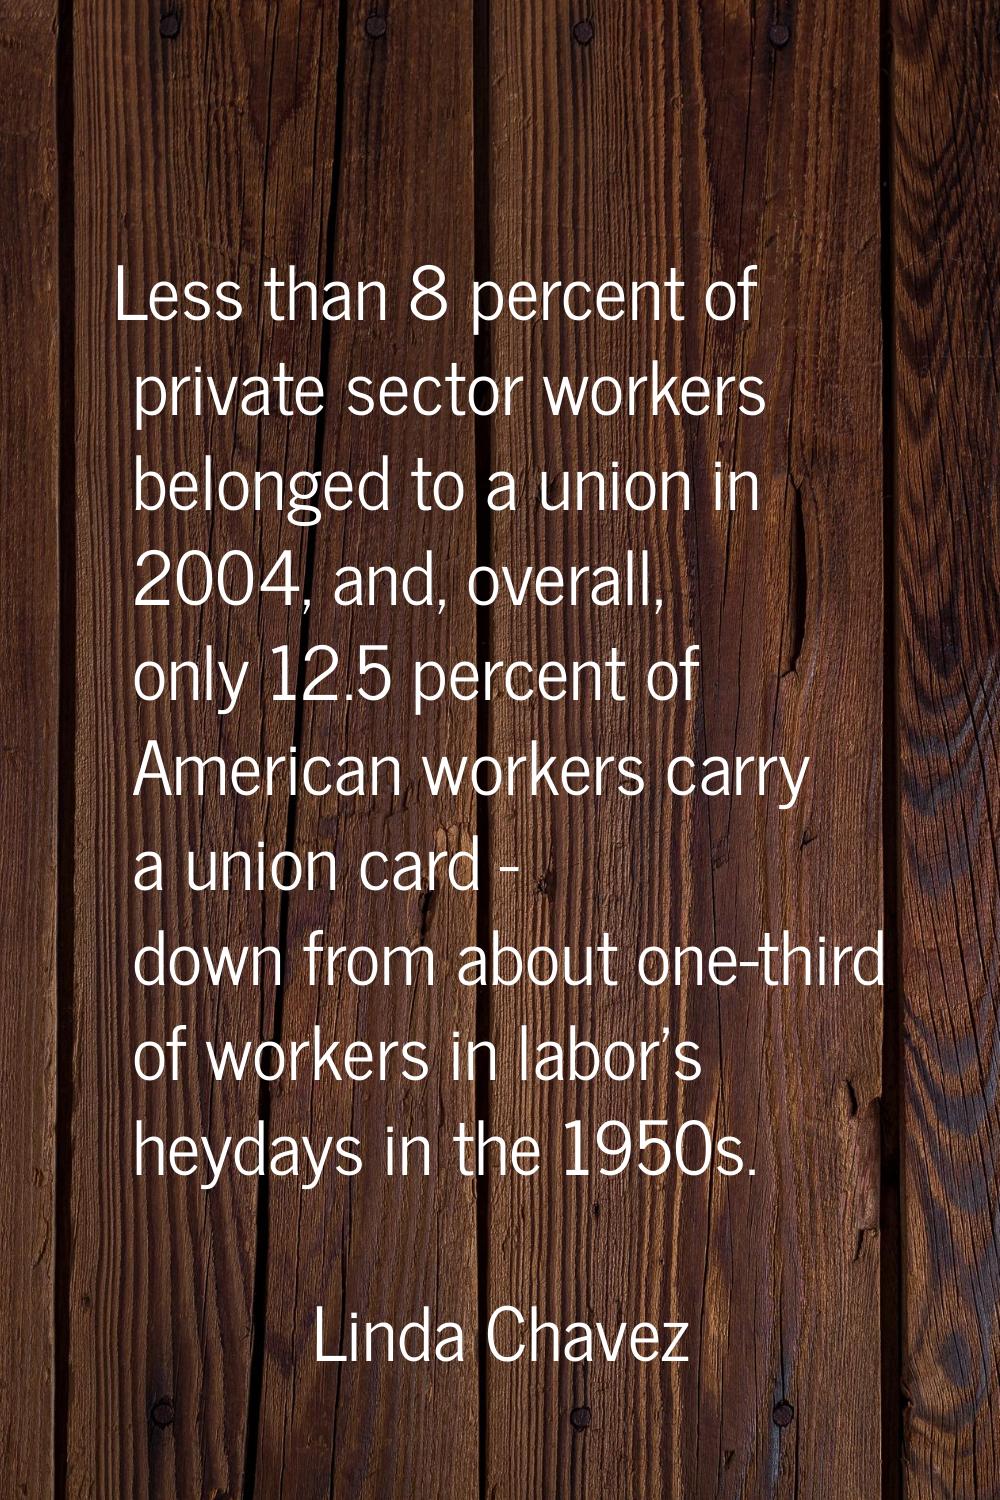 Less than 8 percent of private sector workers belonged to a union in 2004, and, overall, only 12.5 